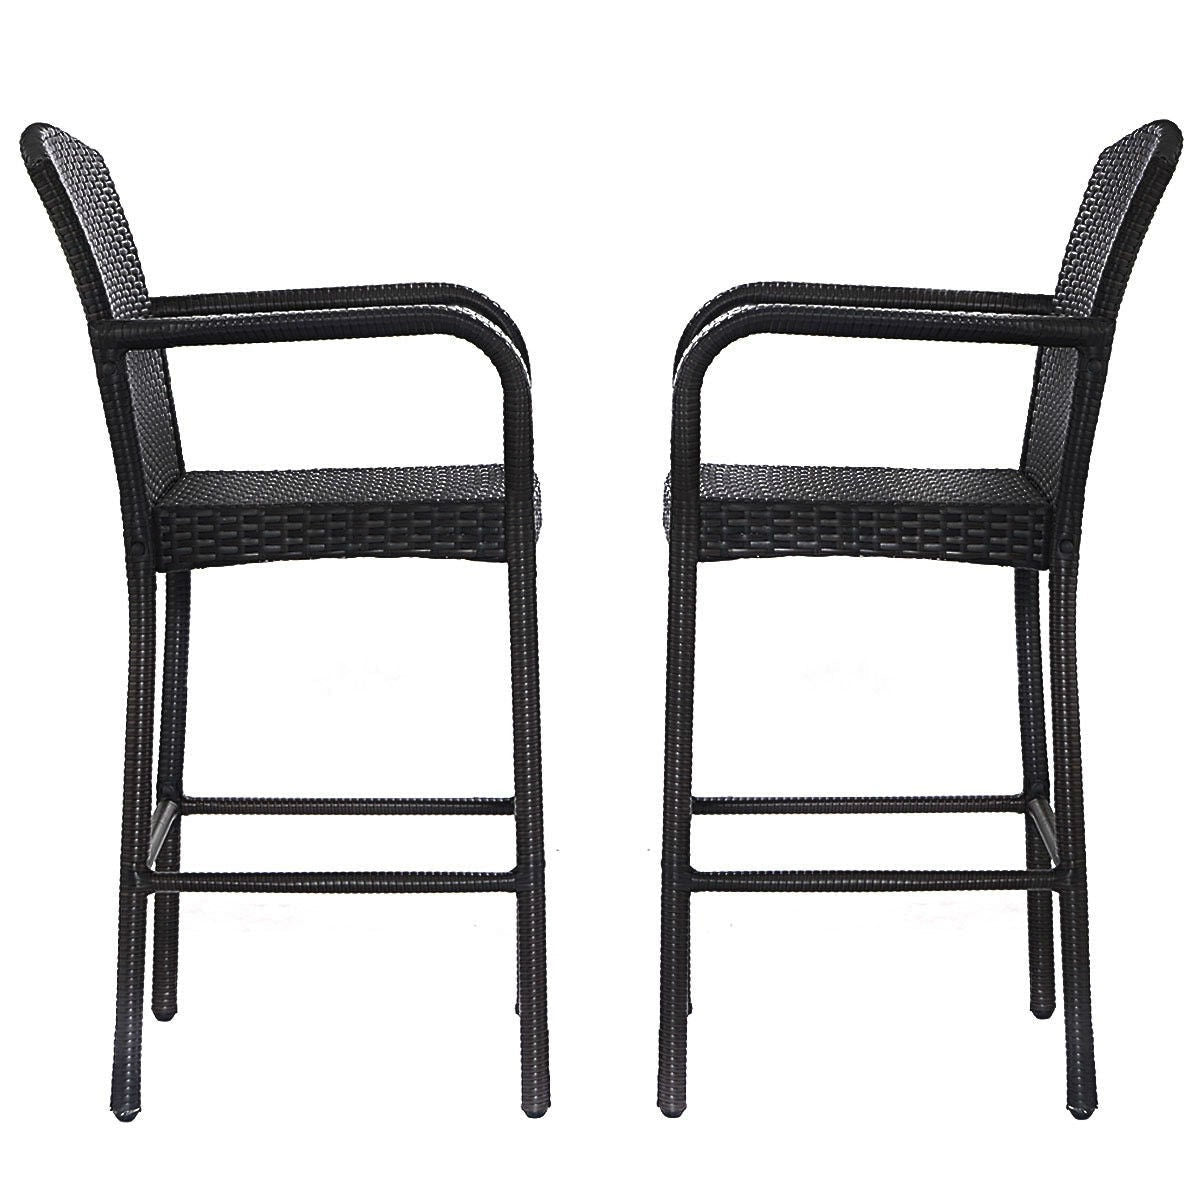 Dining > Barstools - Set Of 2 47-inch Bar Height Brown Rattan Barstool Chairs